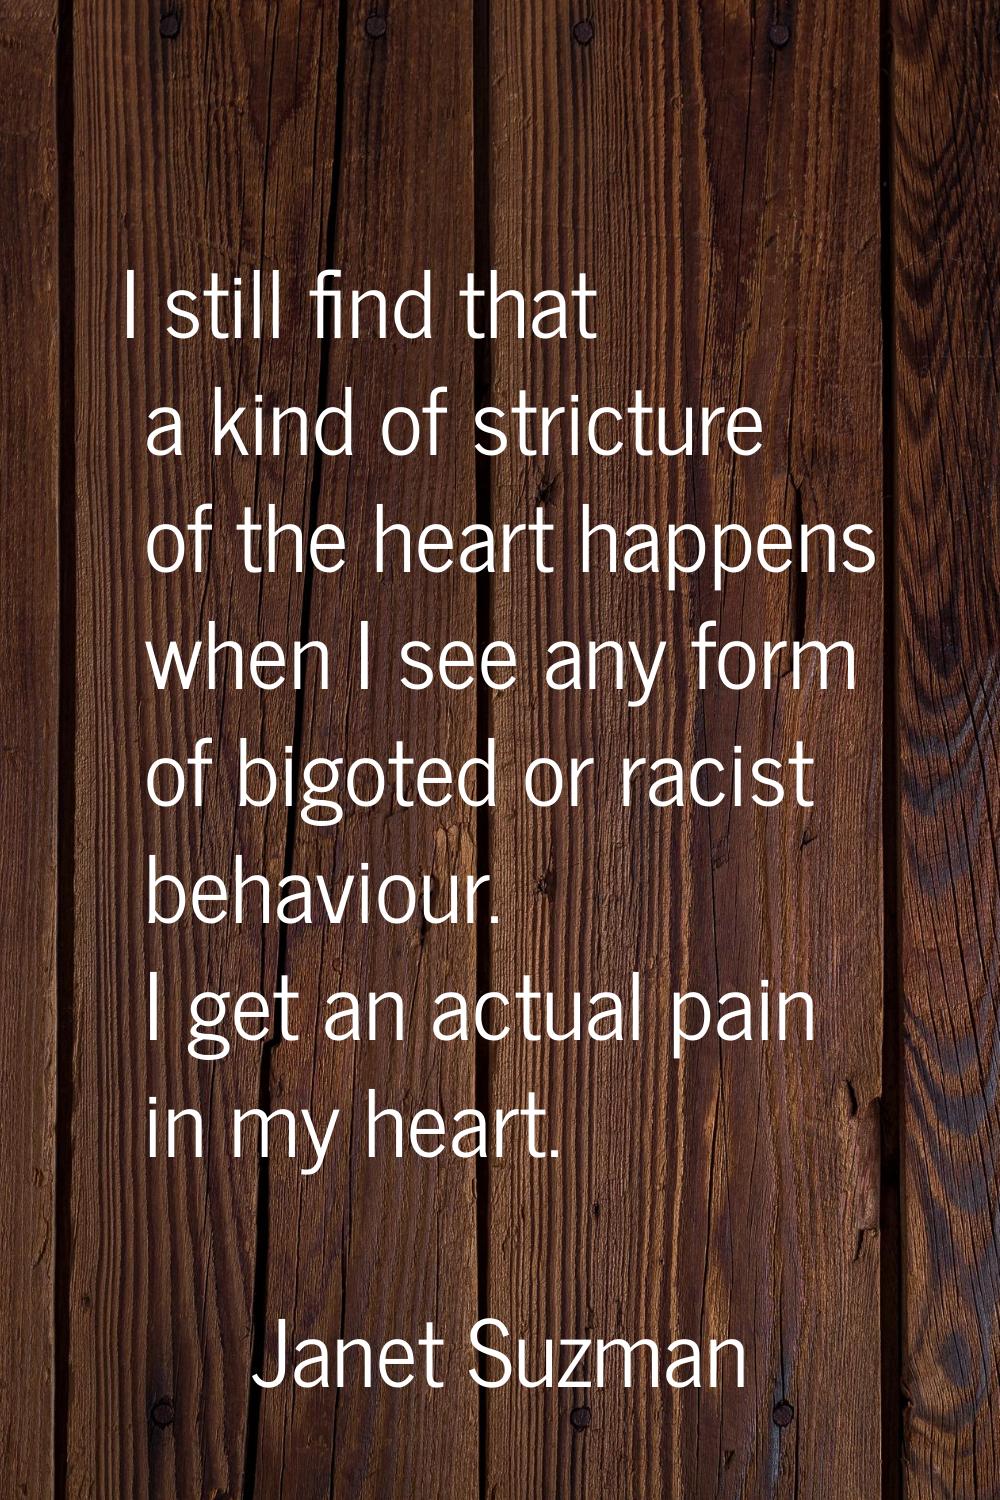 I still find that a kind of stricture of the heart happens when I see any form of bigoted or racist